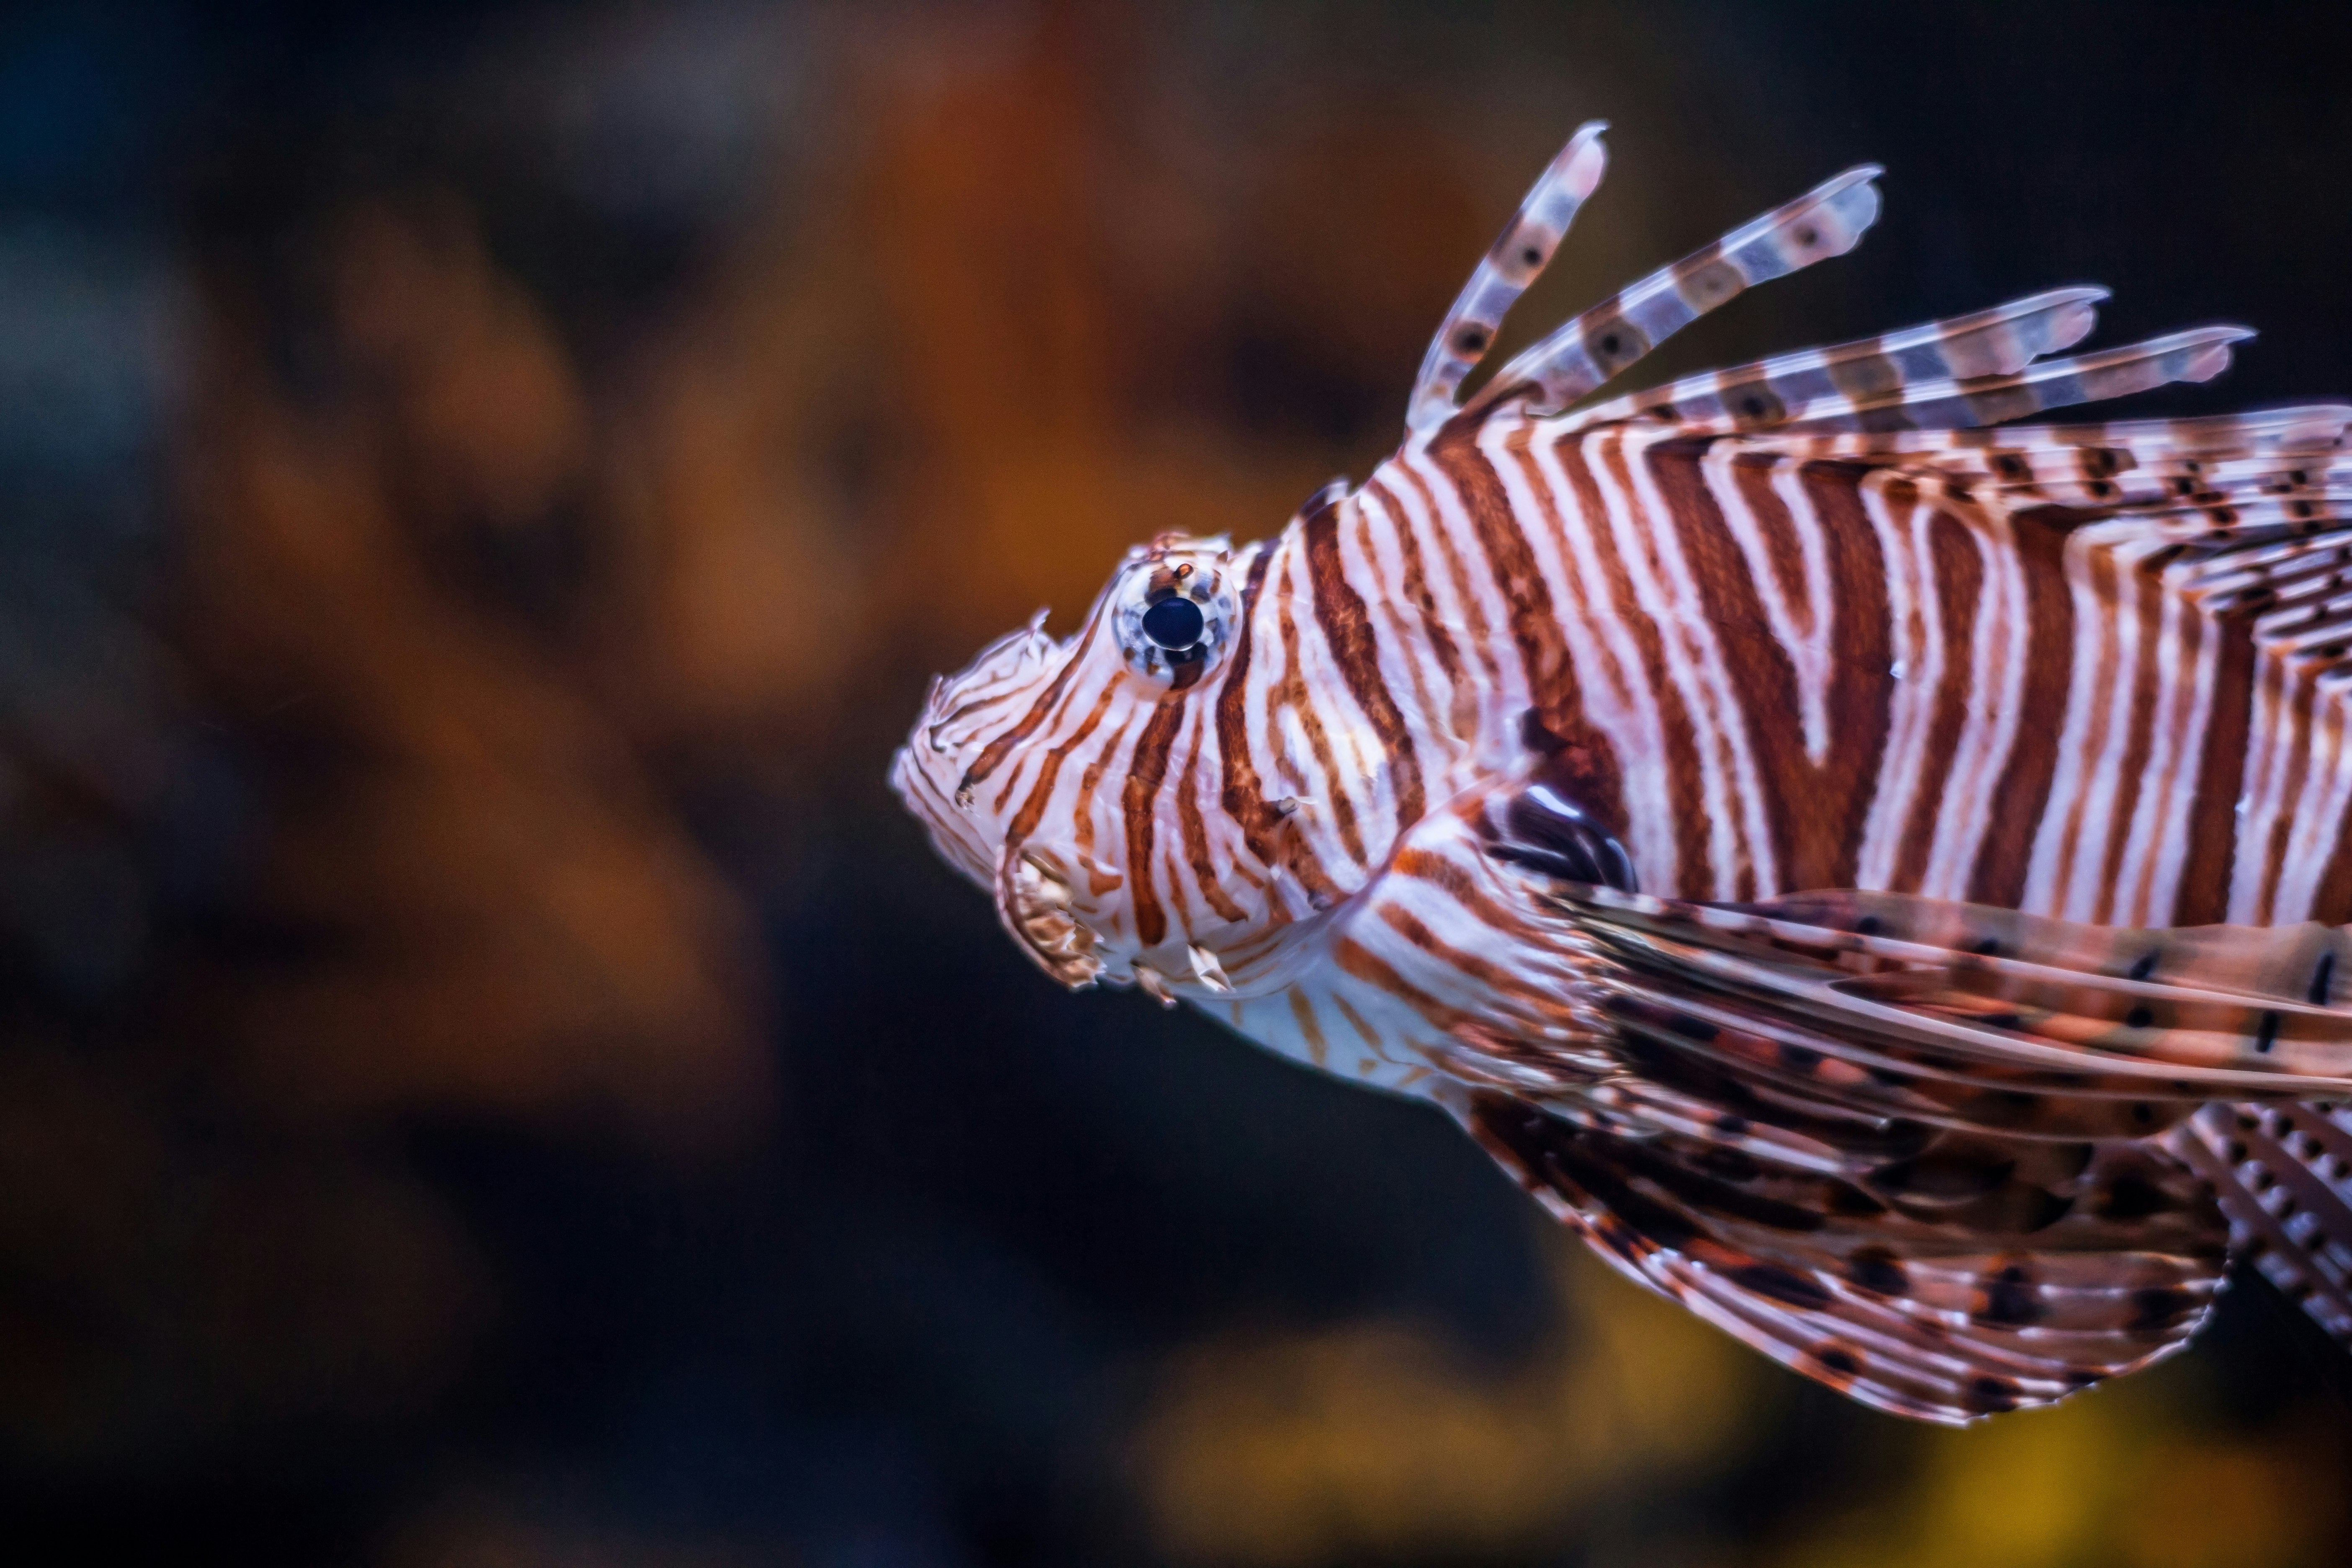 close-up photo of white and brown striped fish